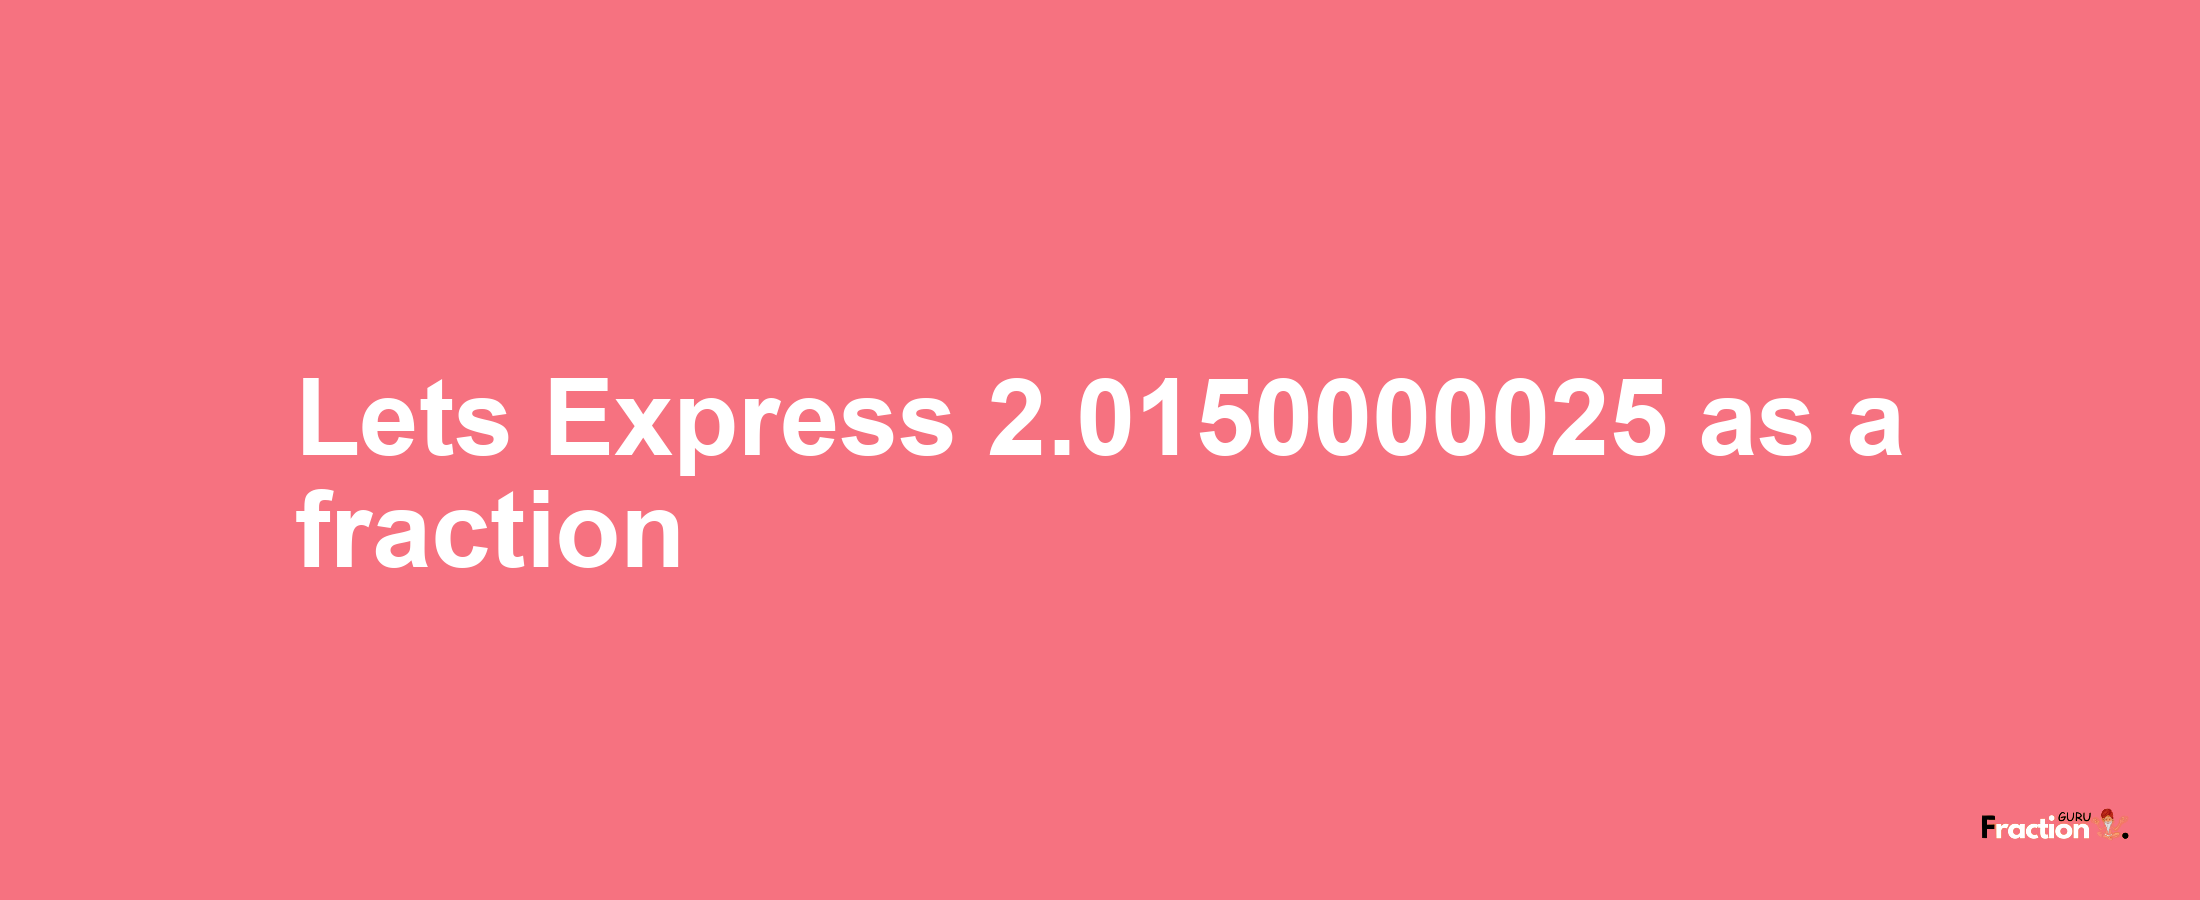 Lets Express 2.0150000025 as afraction